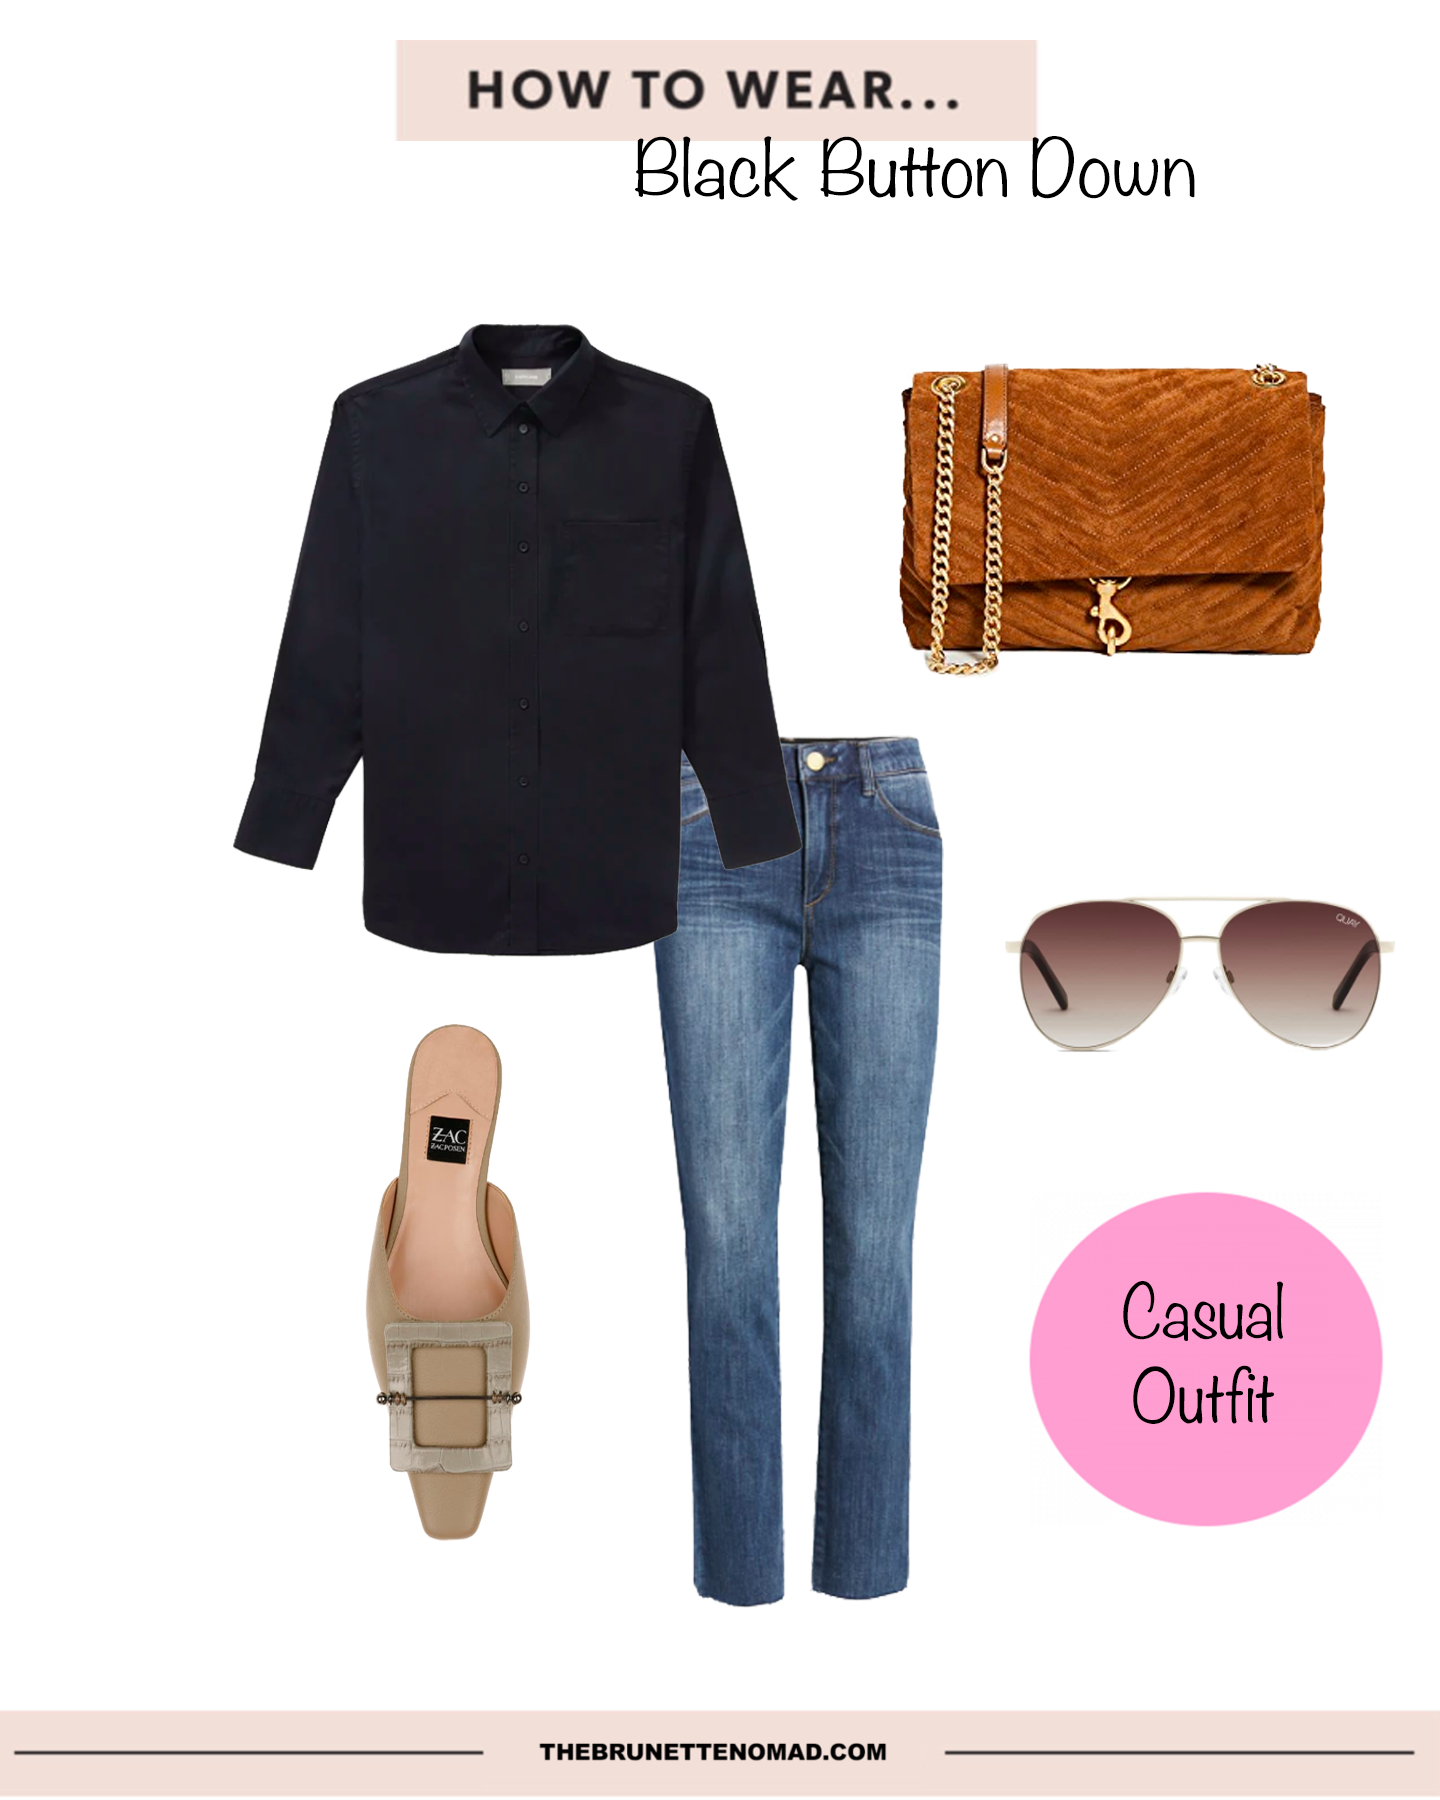 what to wear_black button down_casual outfit